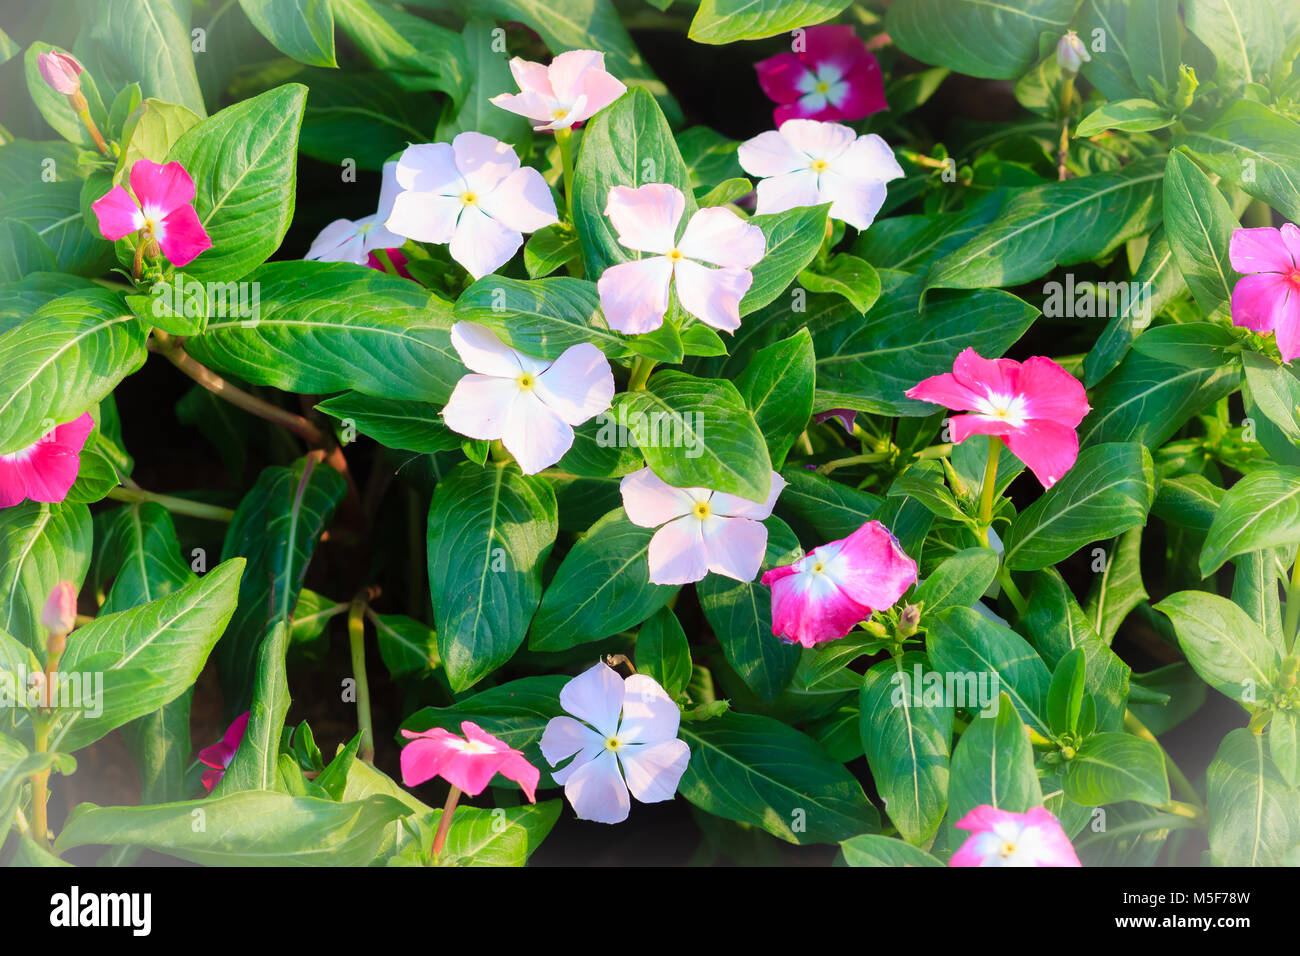 White Catharanthus roseus (commonly known as the Madagascar periwinkle, rosy periwinkle or teresita) - a species of flowering plant in the dogbane fam Stock Photo